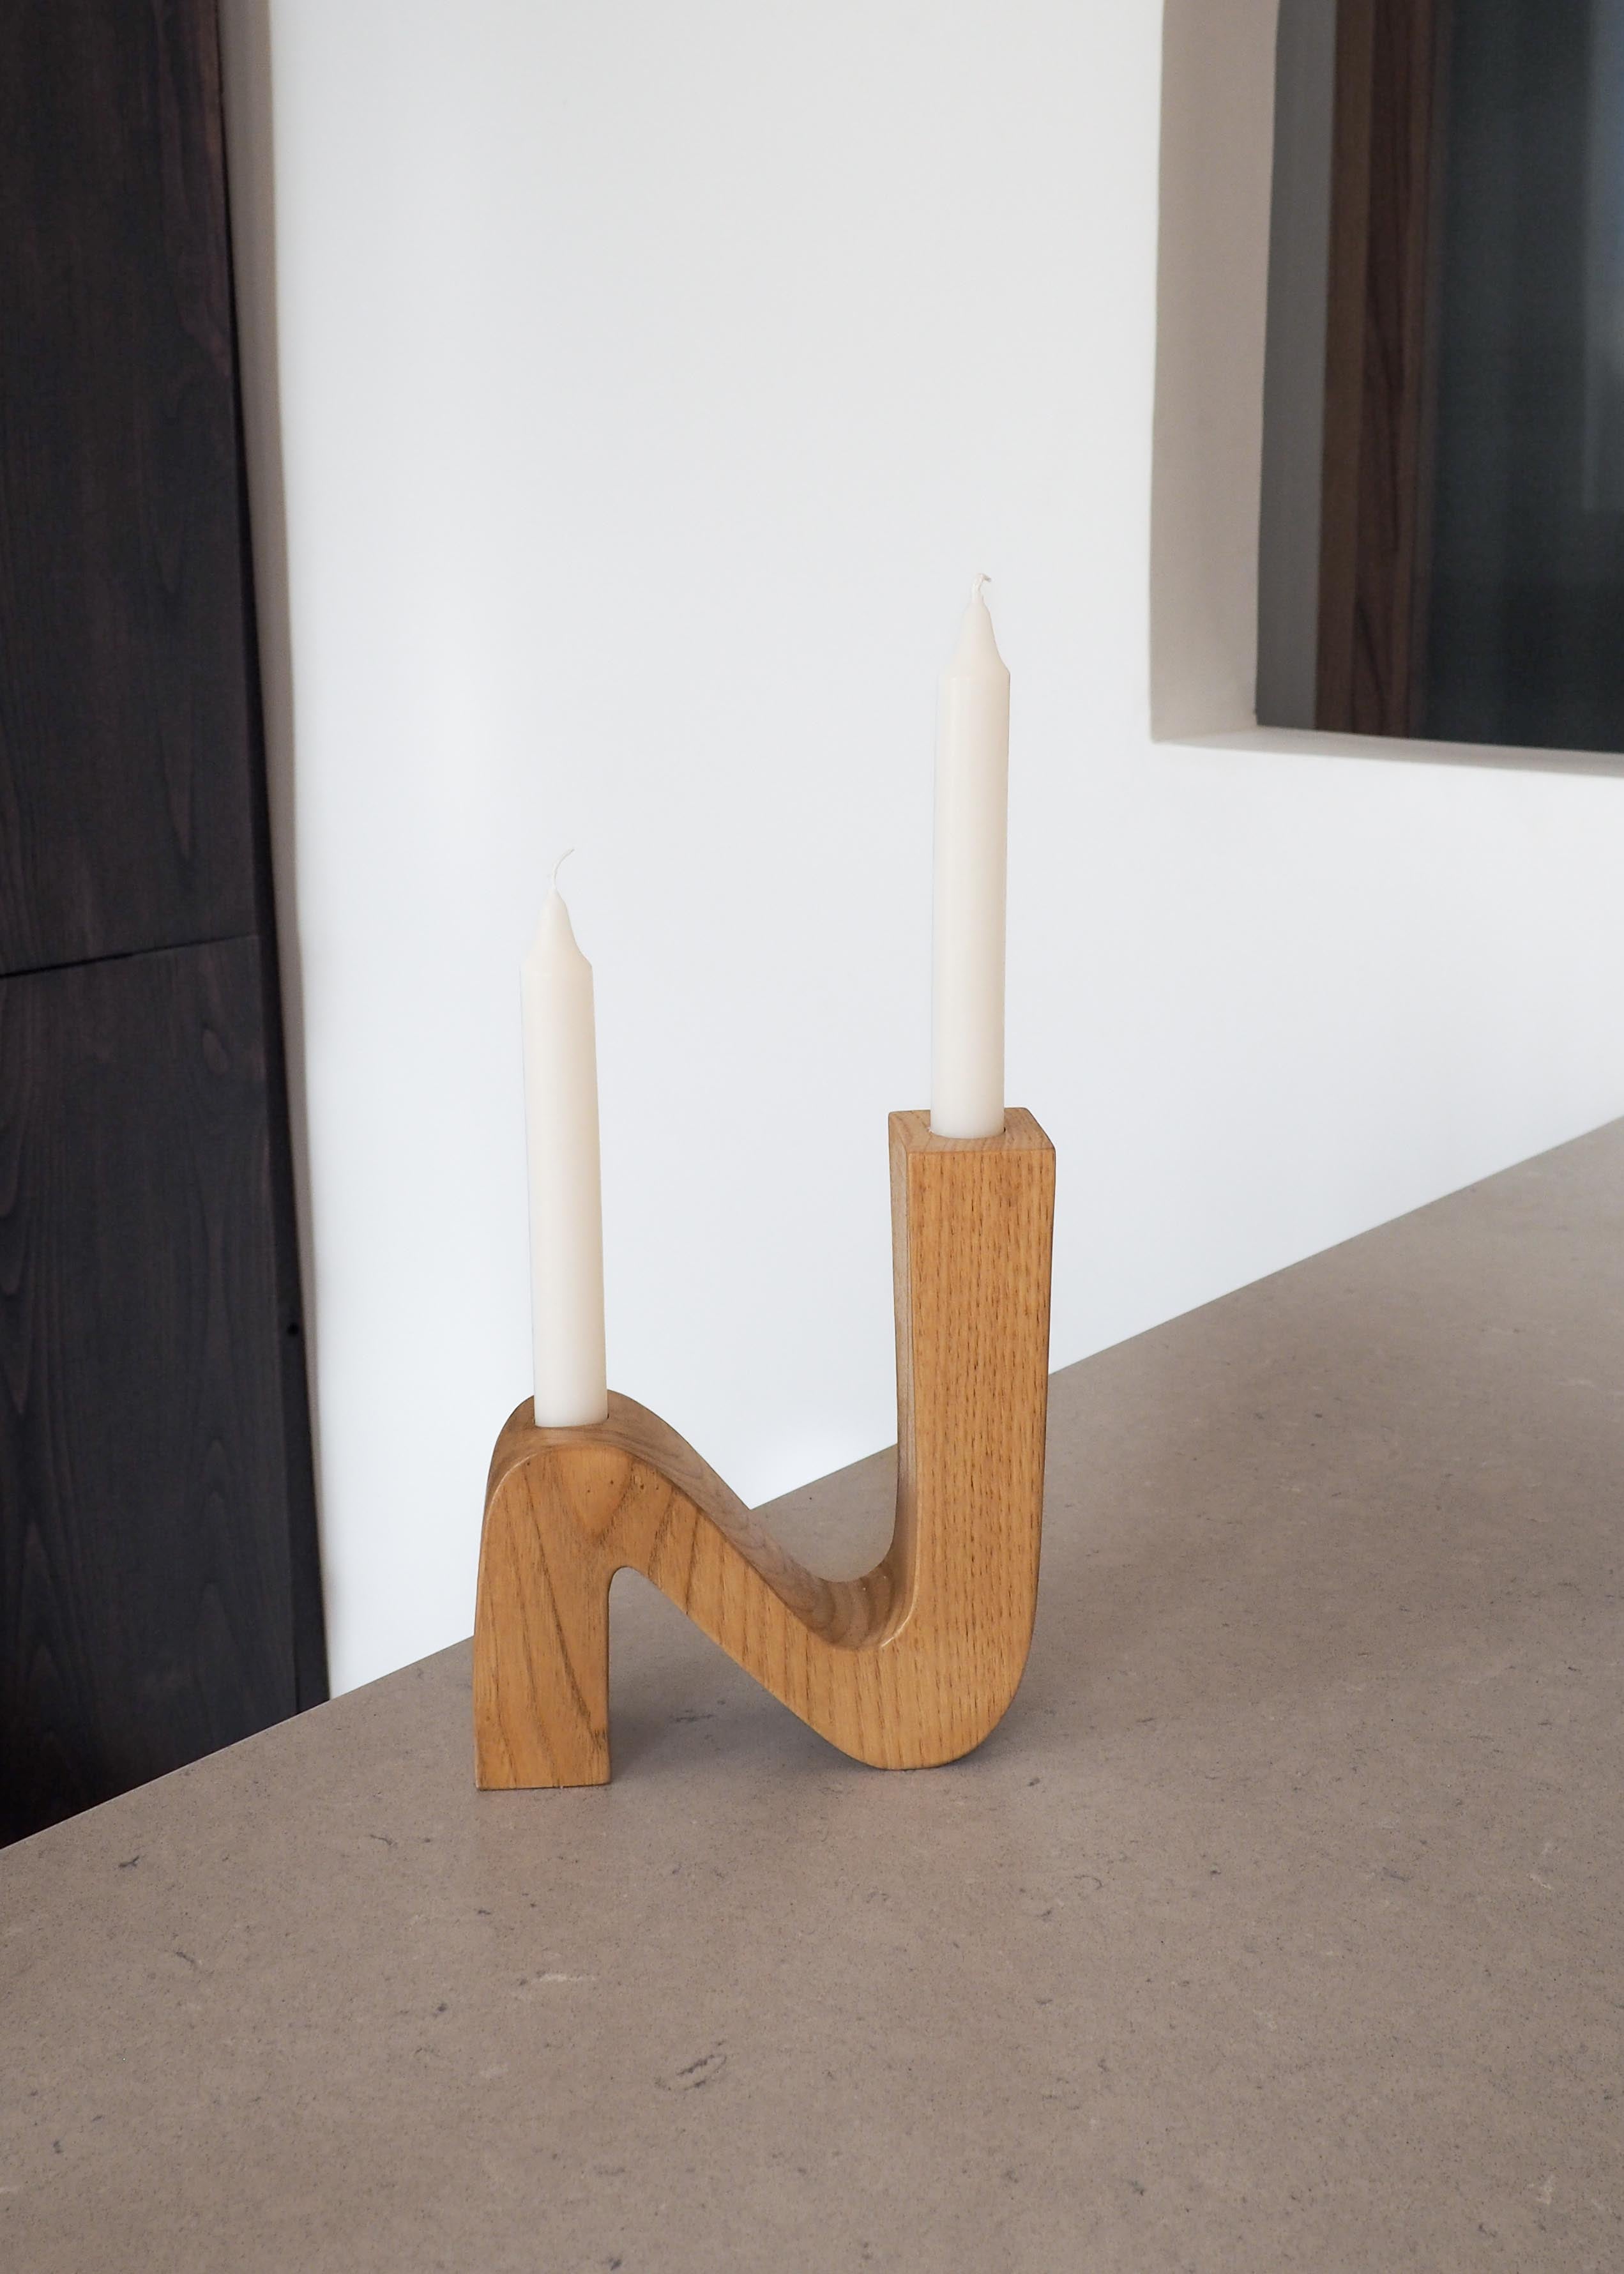 This Onde candlestick was handcrafted in the south of France. In chestnut, it has two places for candles. A matte varnish has been applied to protect the wood without detracting too much from its natural appearance.

Wood : Chestnut
Dimensions: 18 x